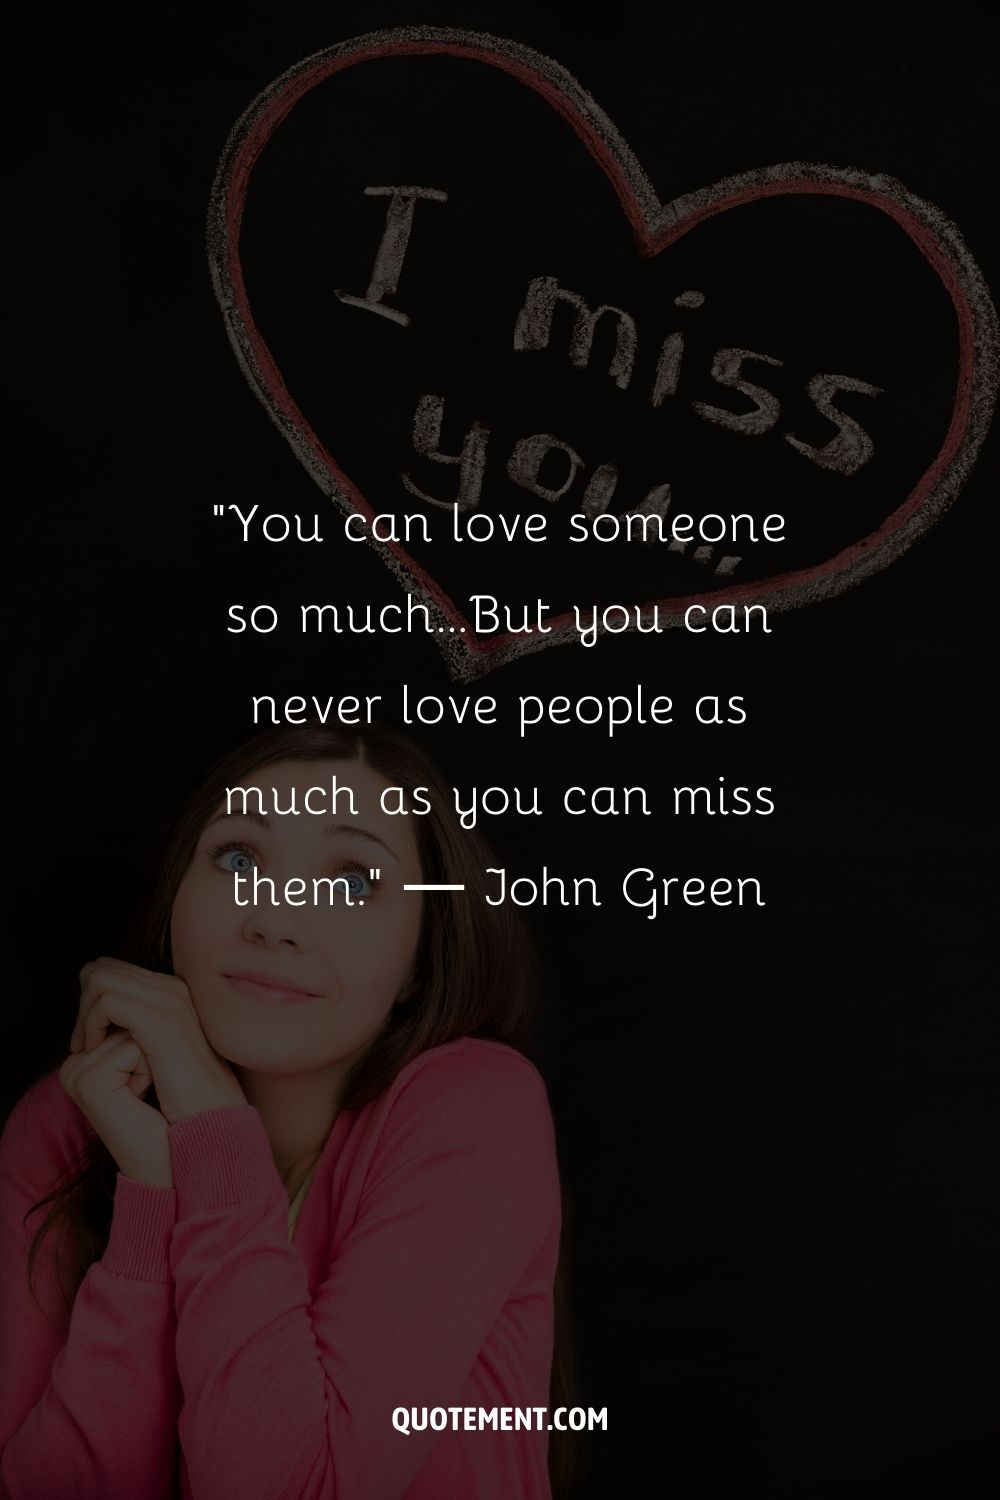 You can love someone so much...But you can never love people as much as you can miss them